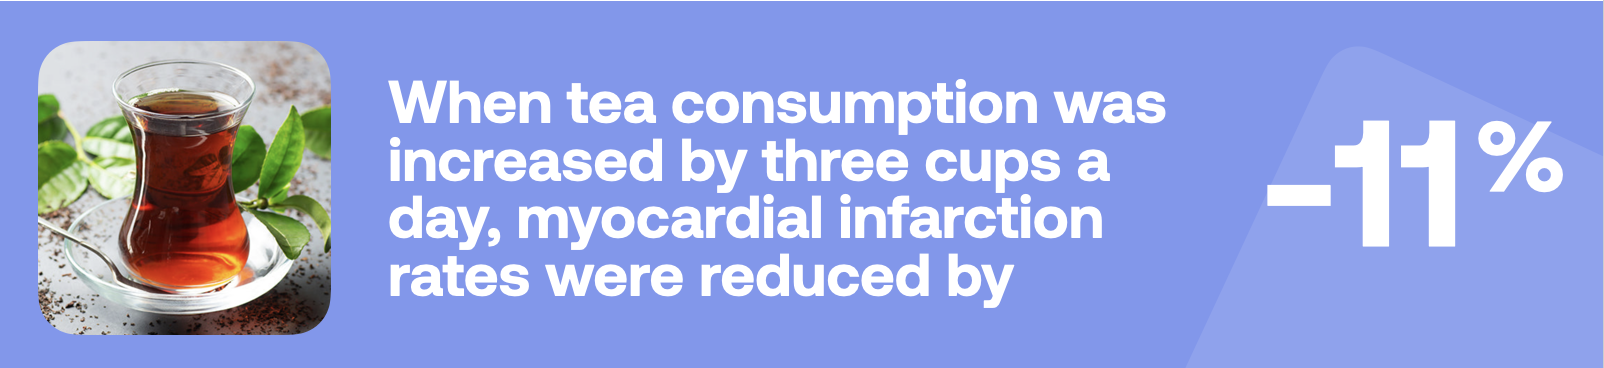 When tea consumption was increased by three cups a day, myocardial infarction rates were reduced by -11%